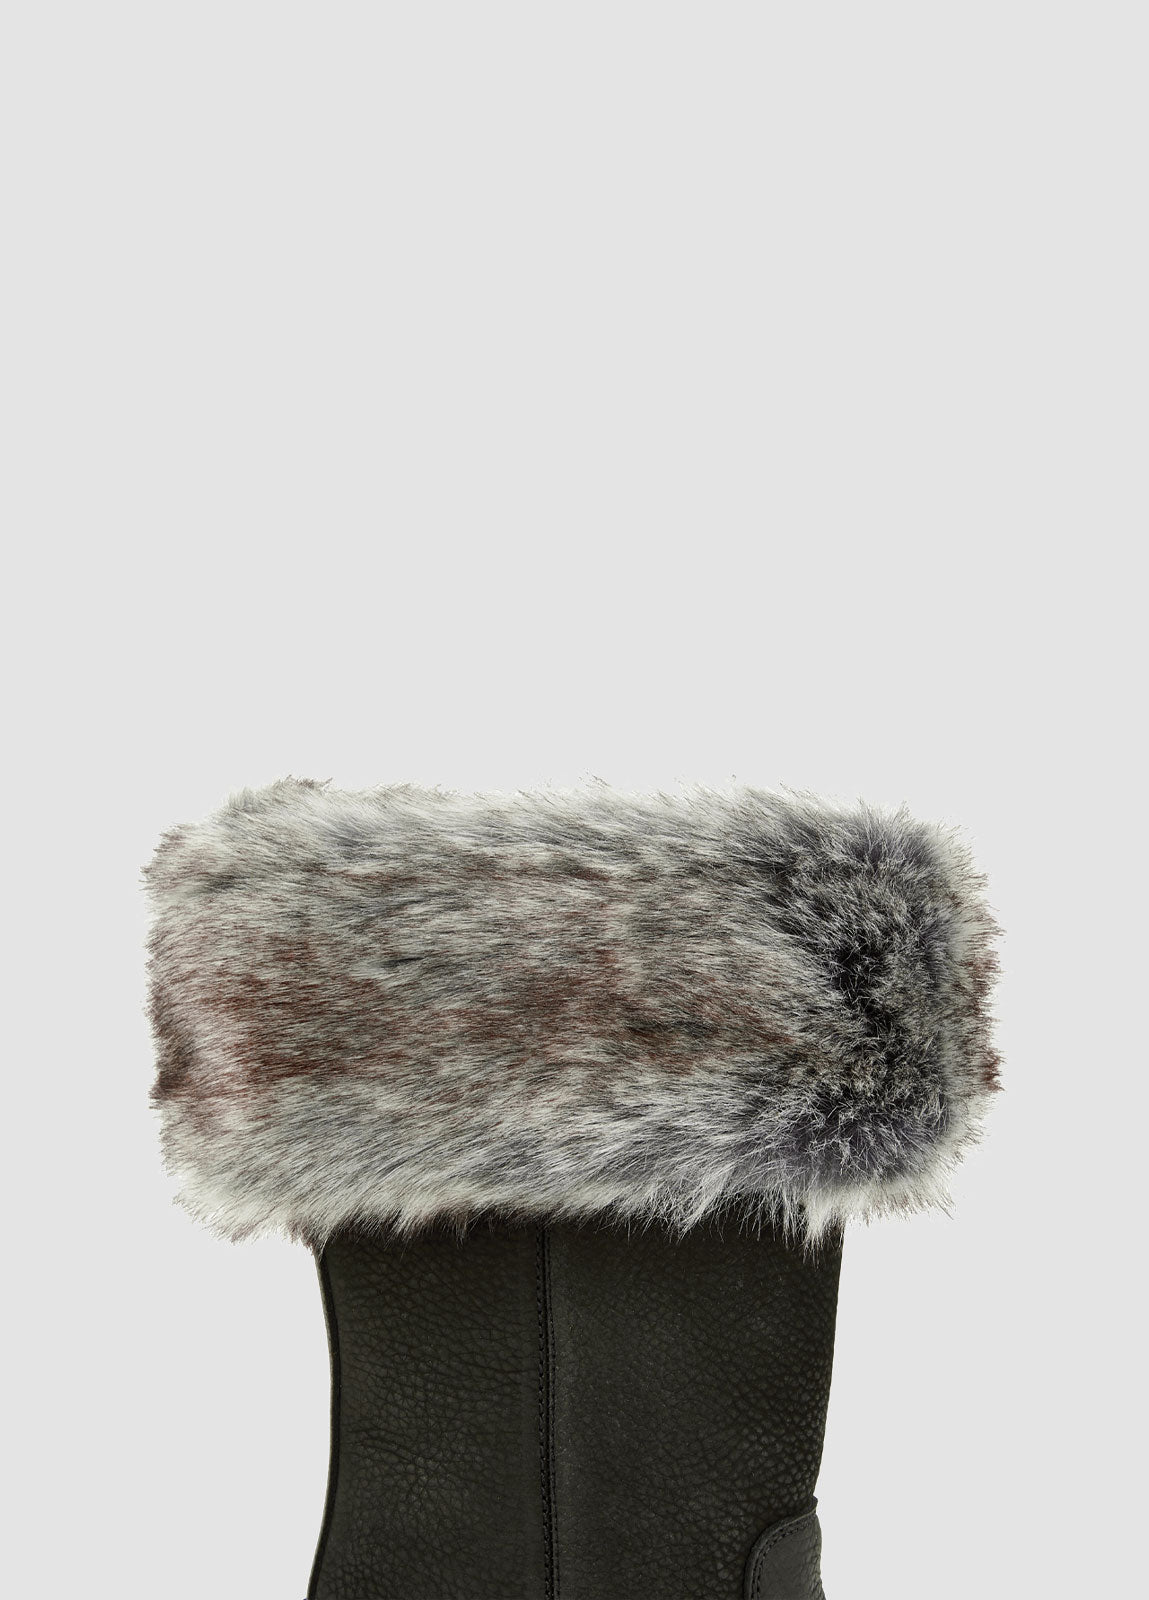 Raferty Faux Fur Boot Liners - Sable